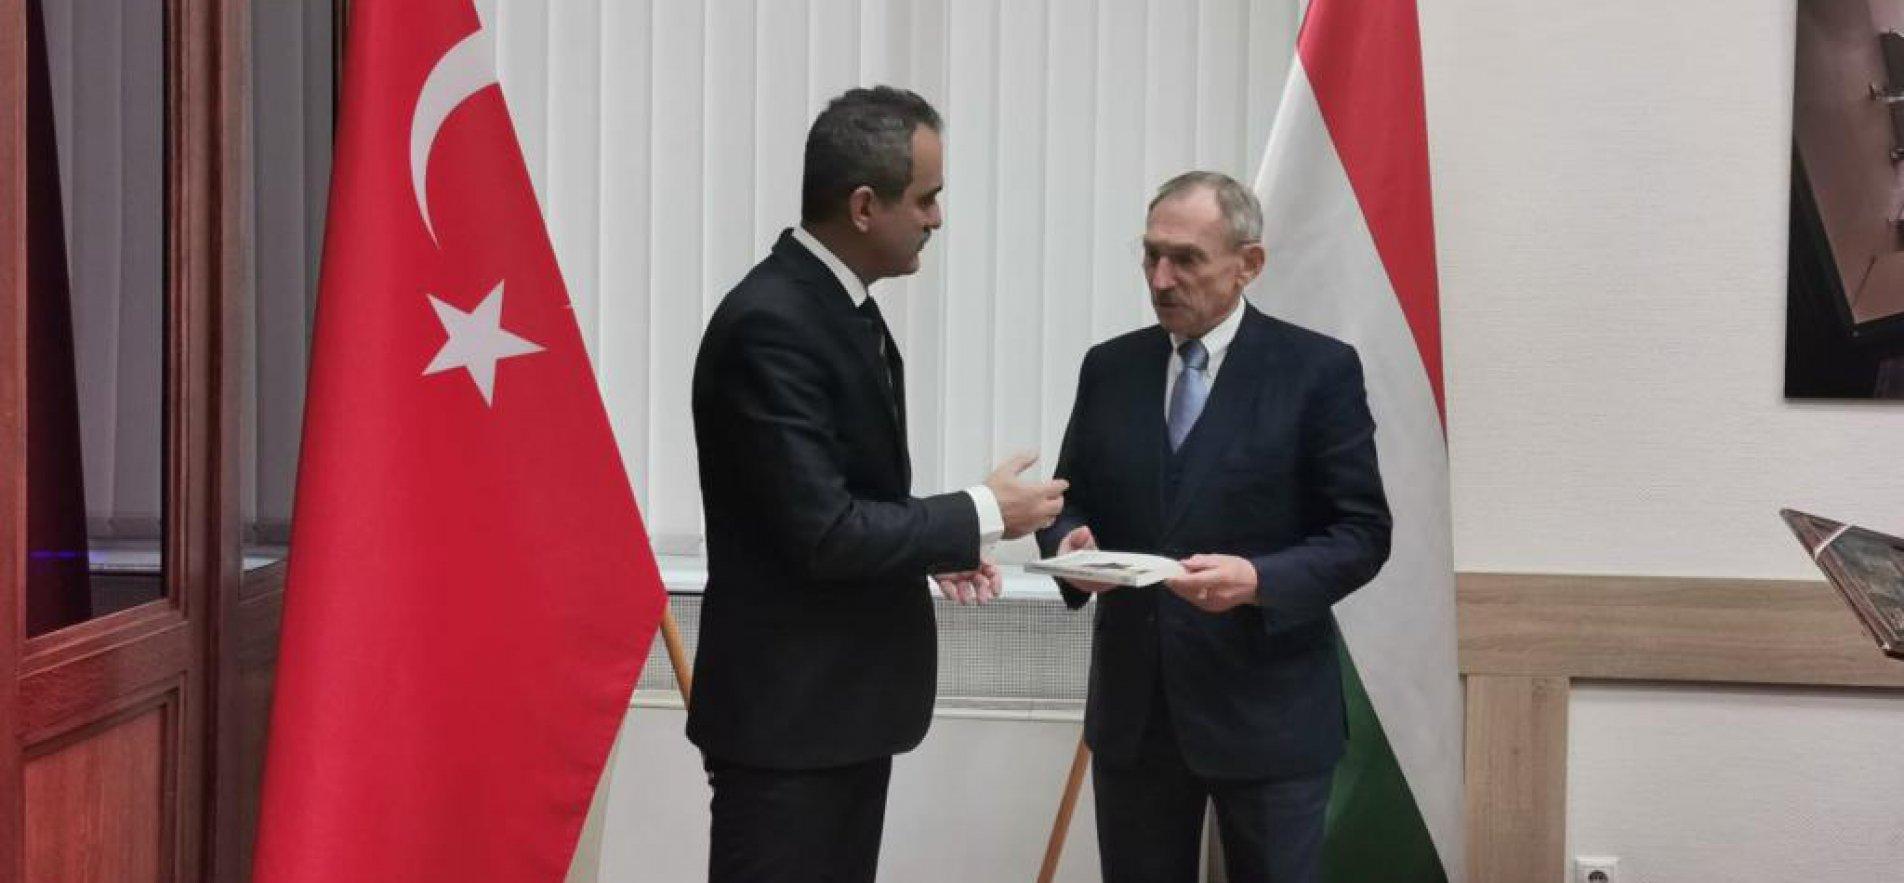 MINISTER OZER MEETS WITH MINISTER OF INTERIOR OF HUNGARY SANDOR PINTER